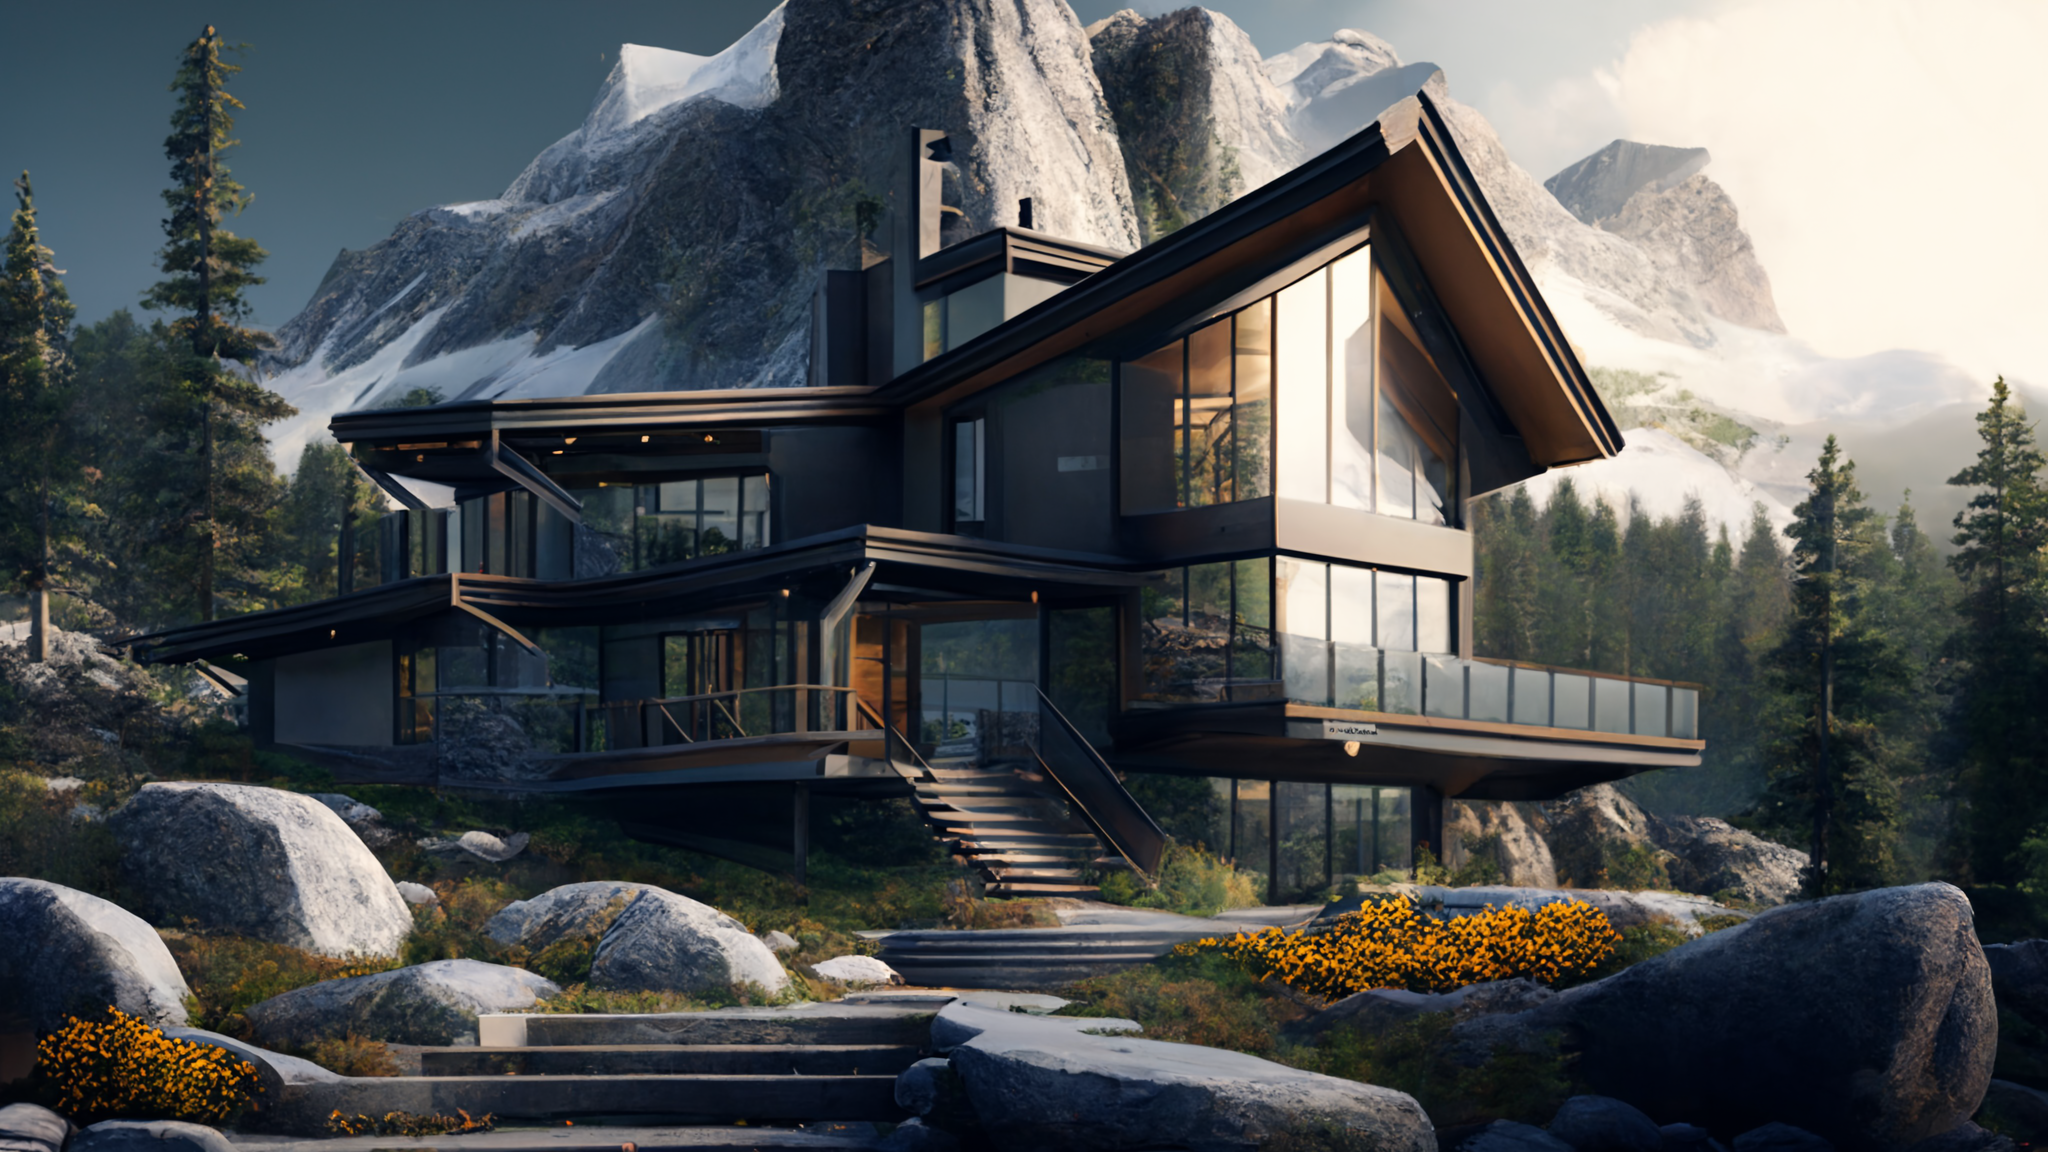 http://prompthero.ai/wp-content/uploads/2023/02/JohnB_A_modern_house_in_the_mountains_photo_realistic_967b6ffa-411a-4283-9ab5-2fad381db0ba.png